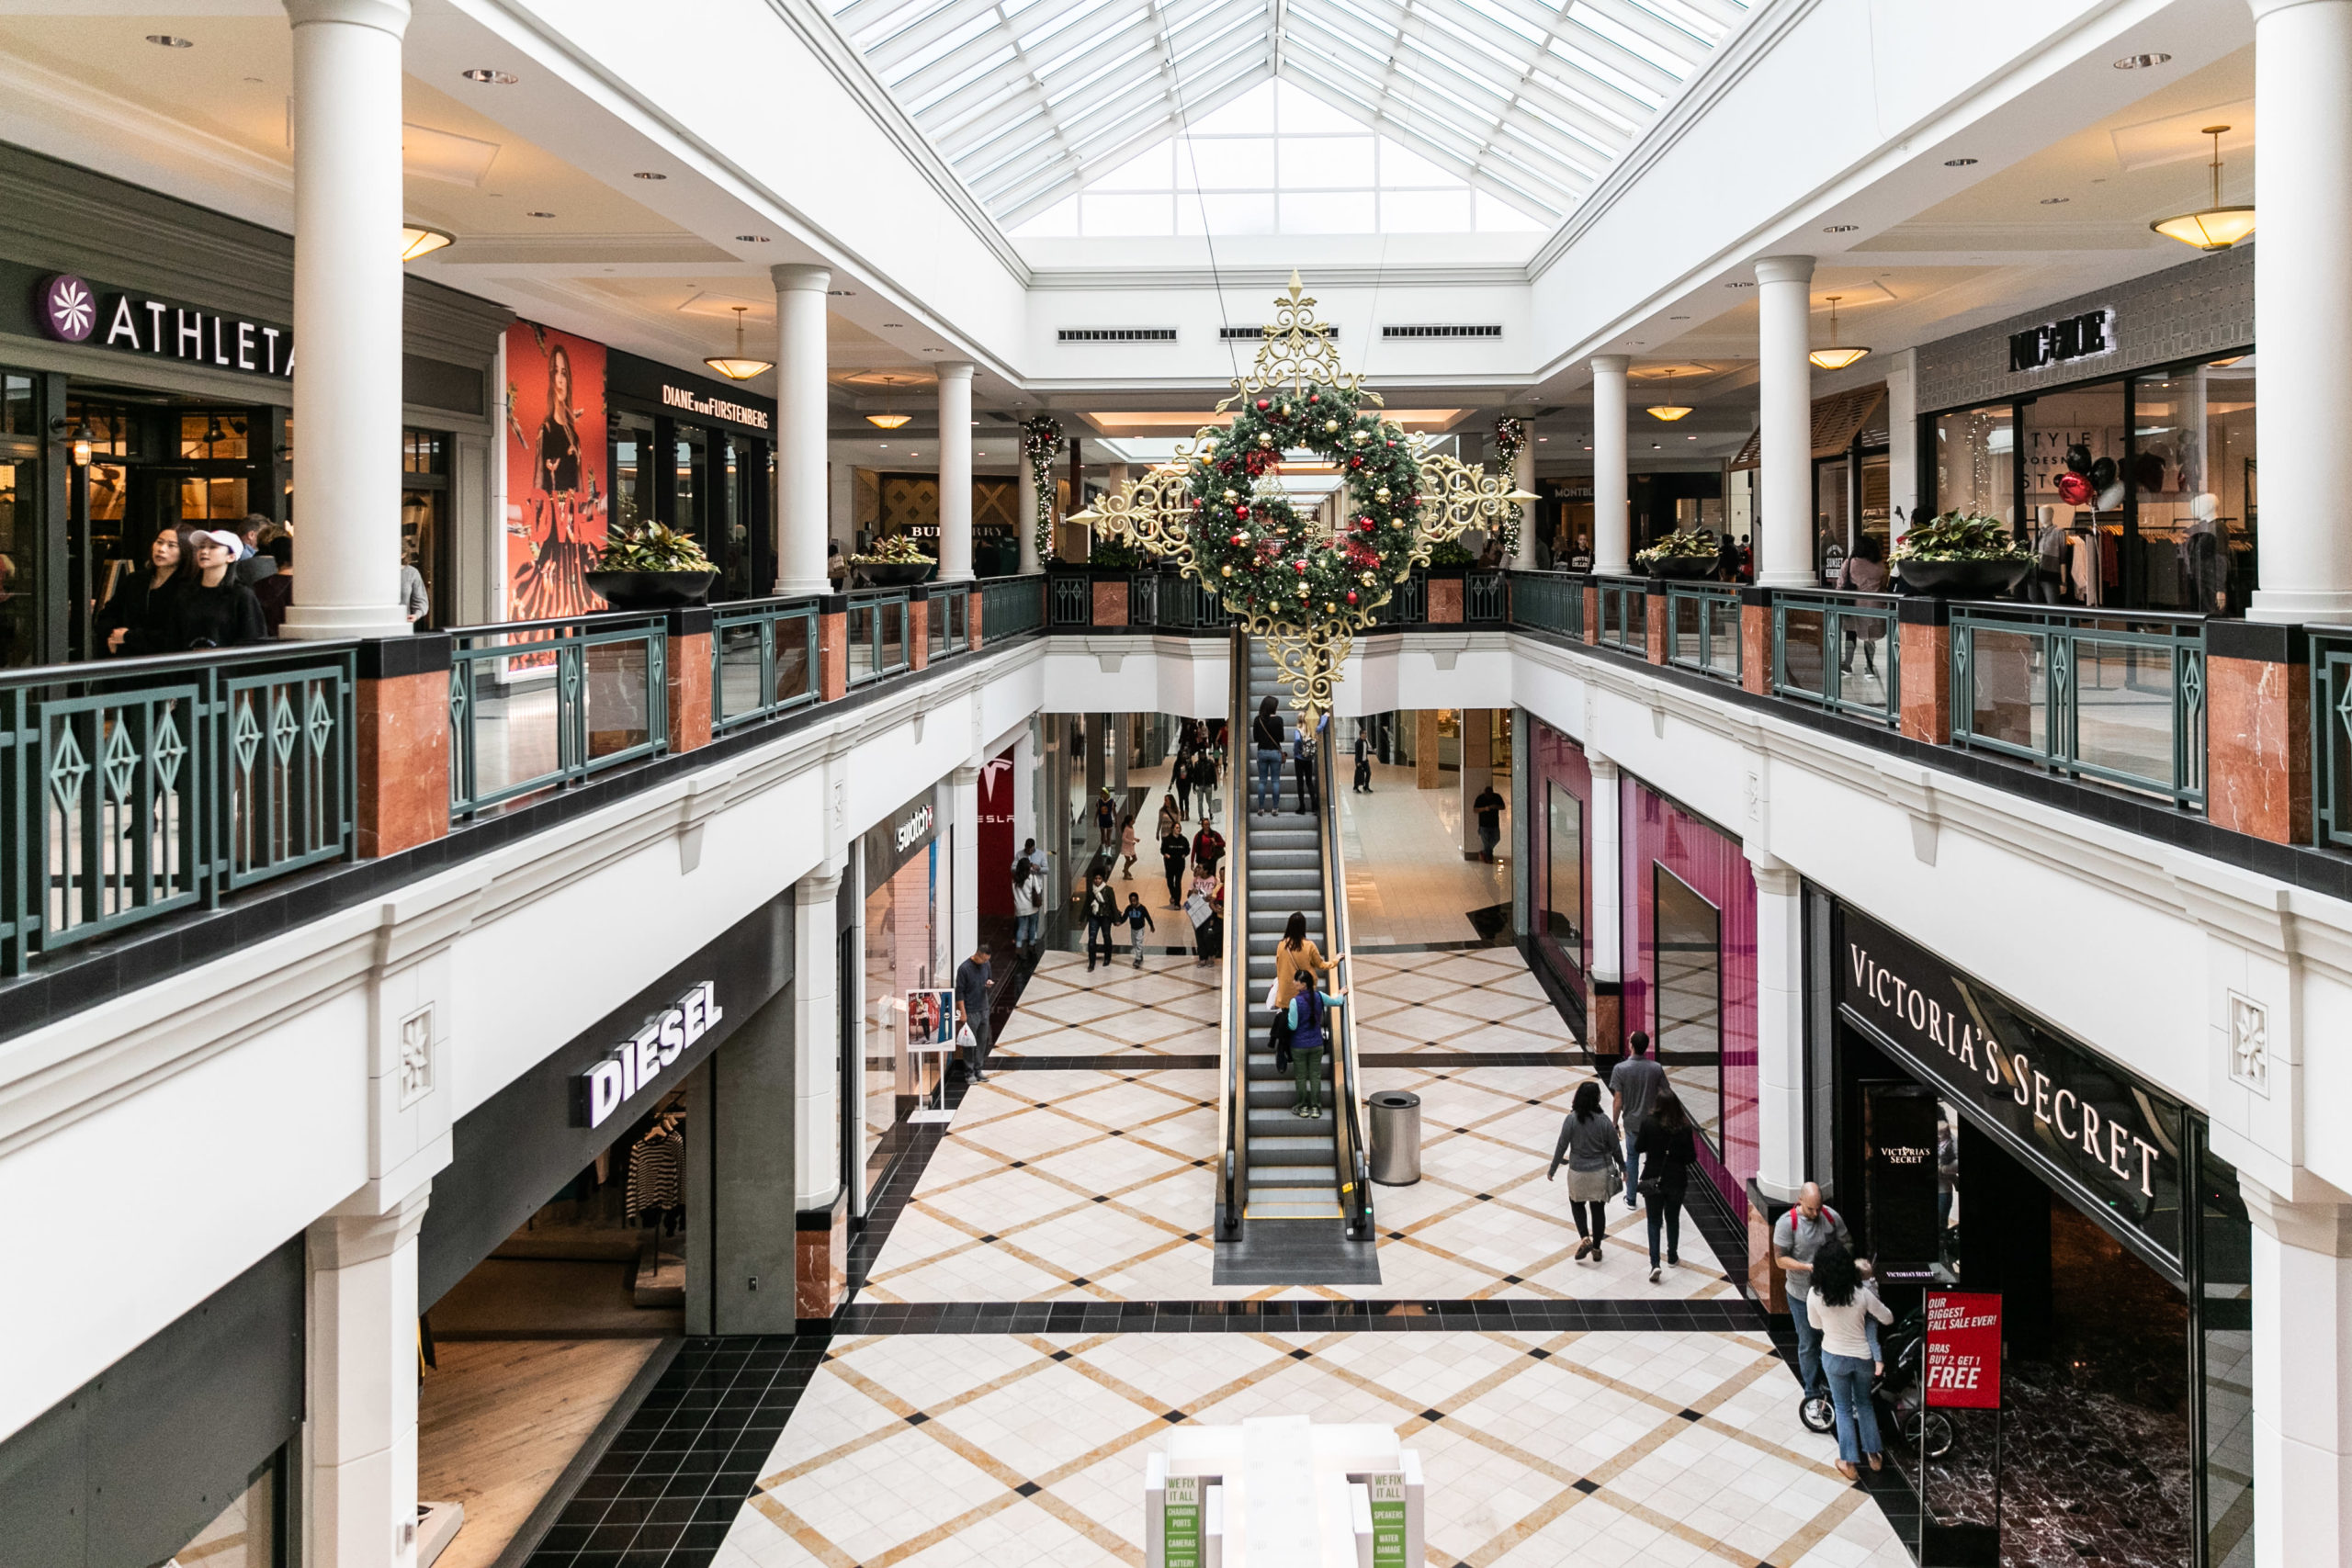 The largest US mall proprietor Simon Property Group is doubling down on retail